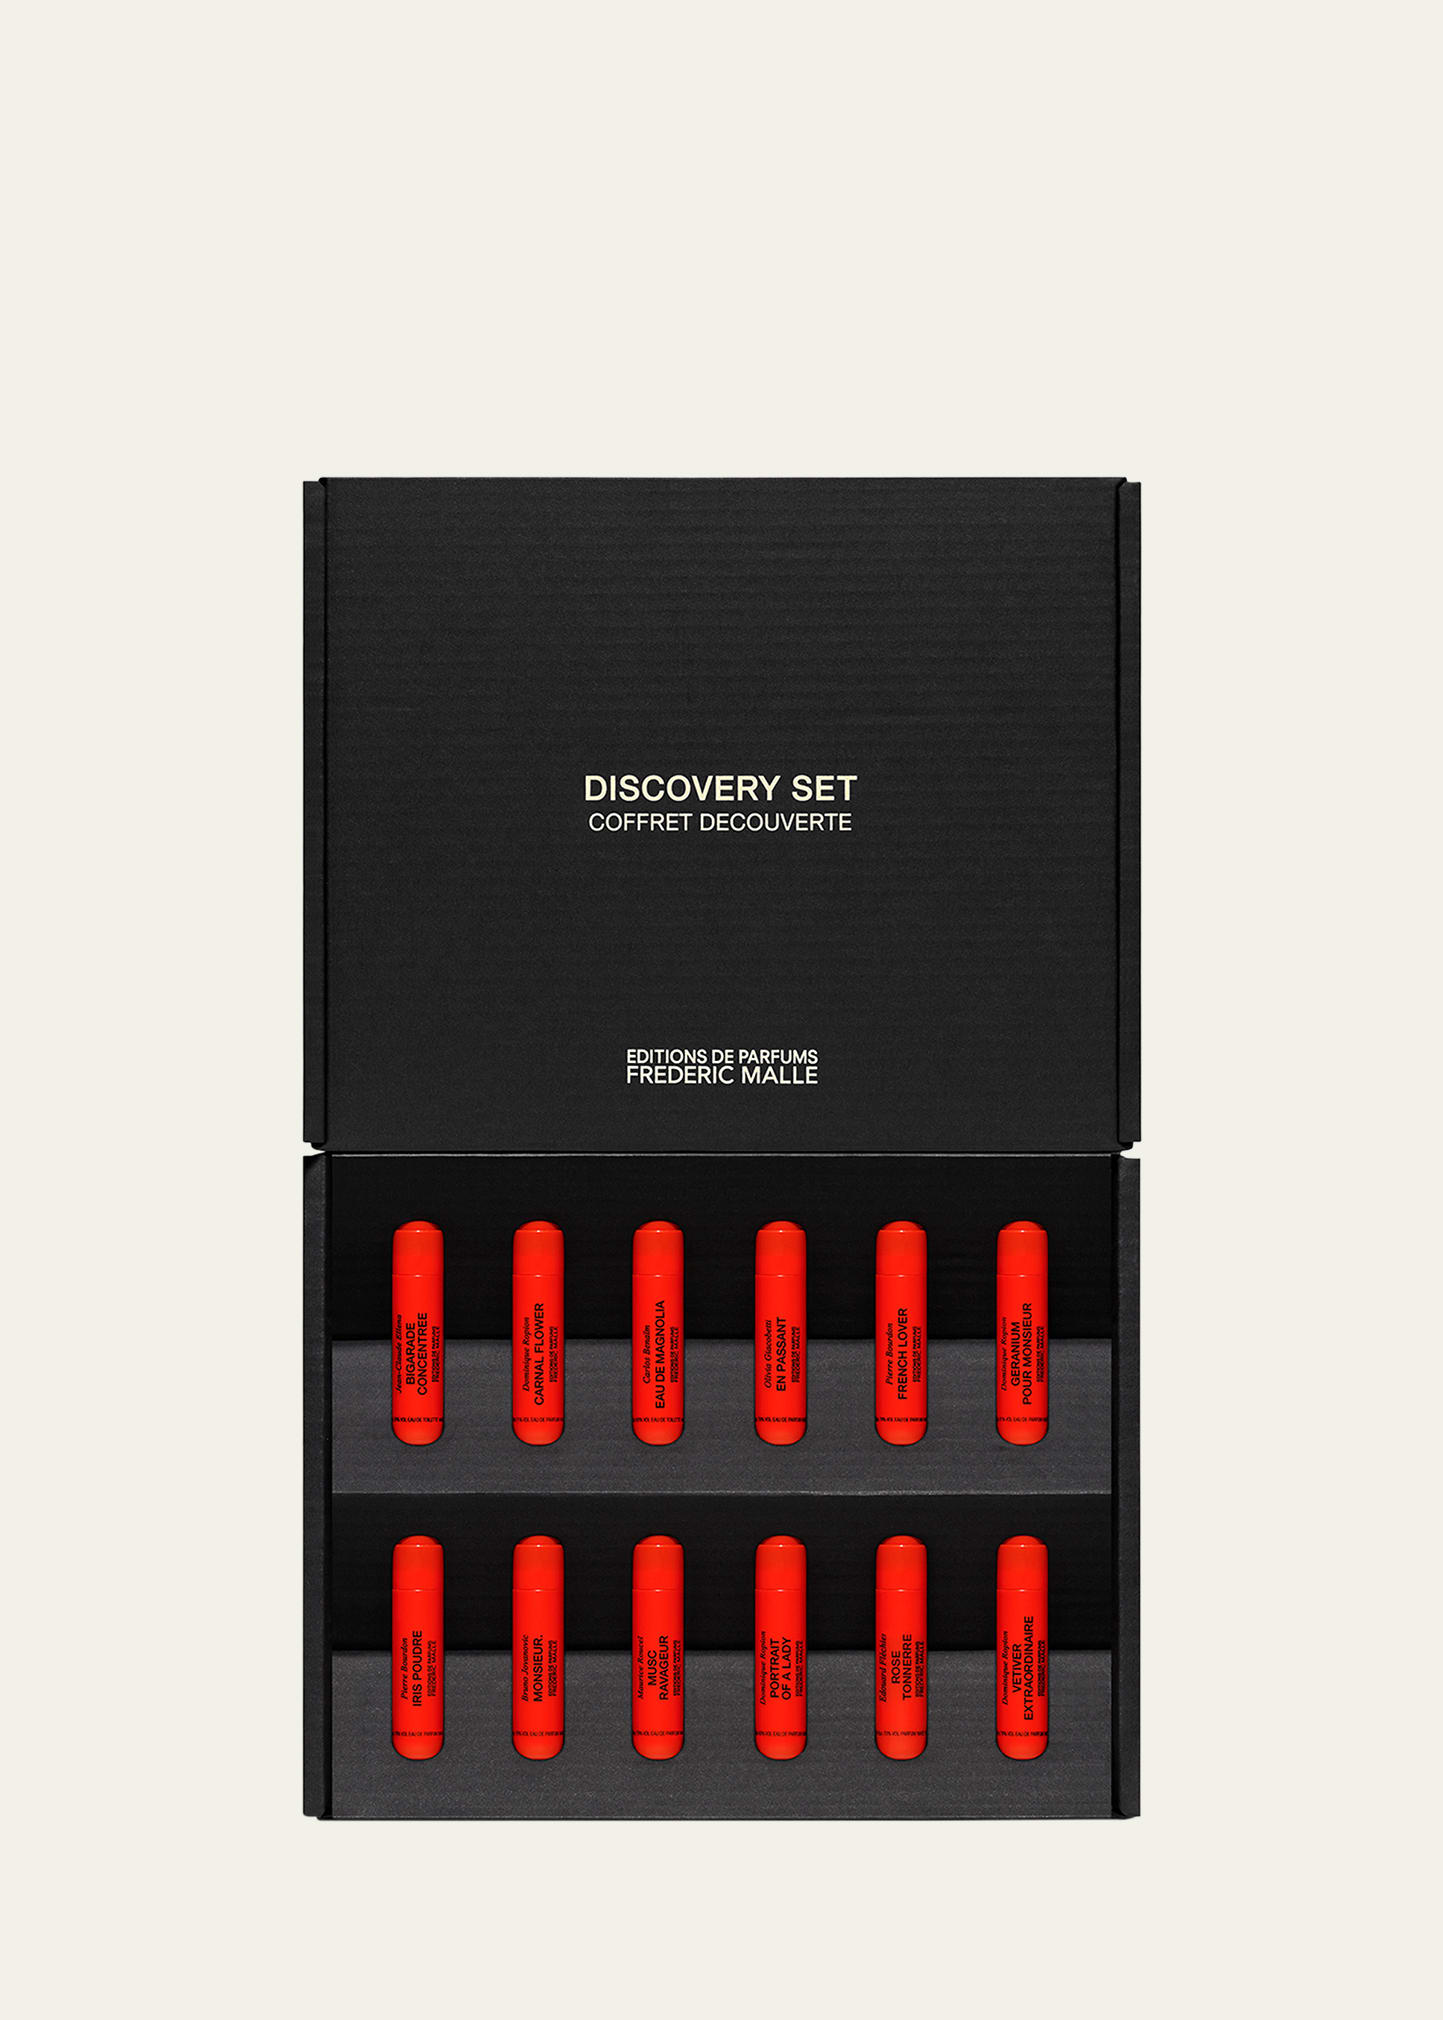 Editions De Parfums Frederic Malle Fragrance Discovery Set, 12 X 1.2 ml In White